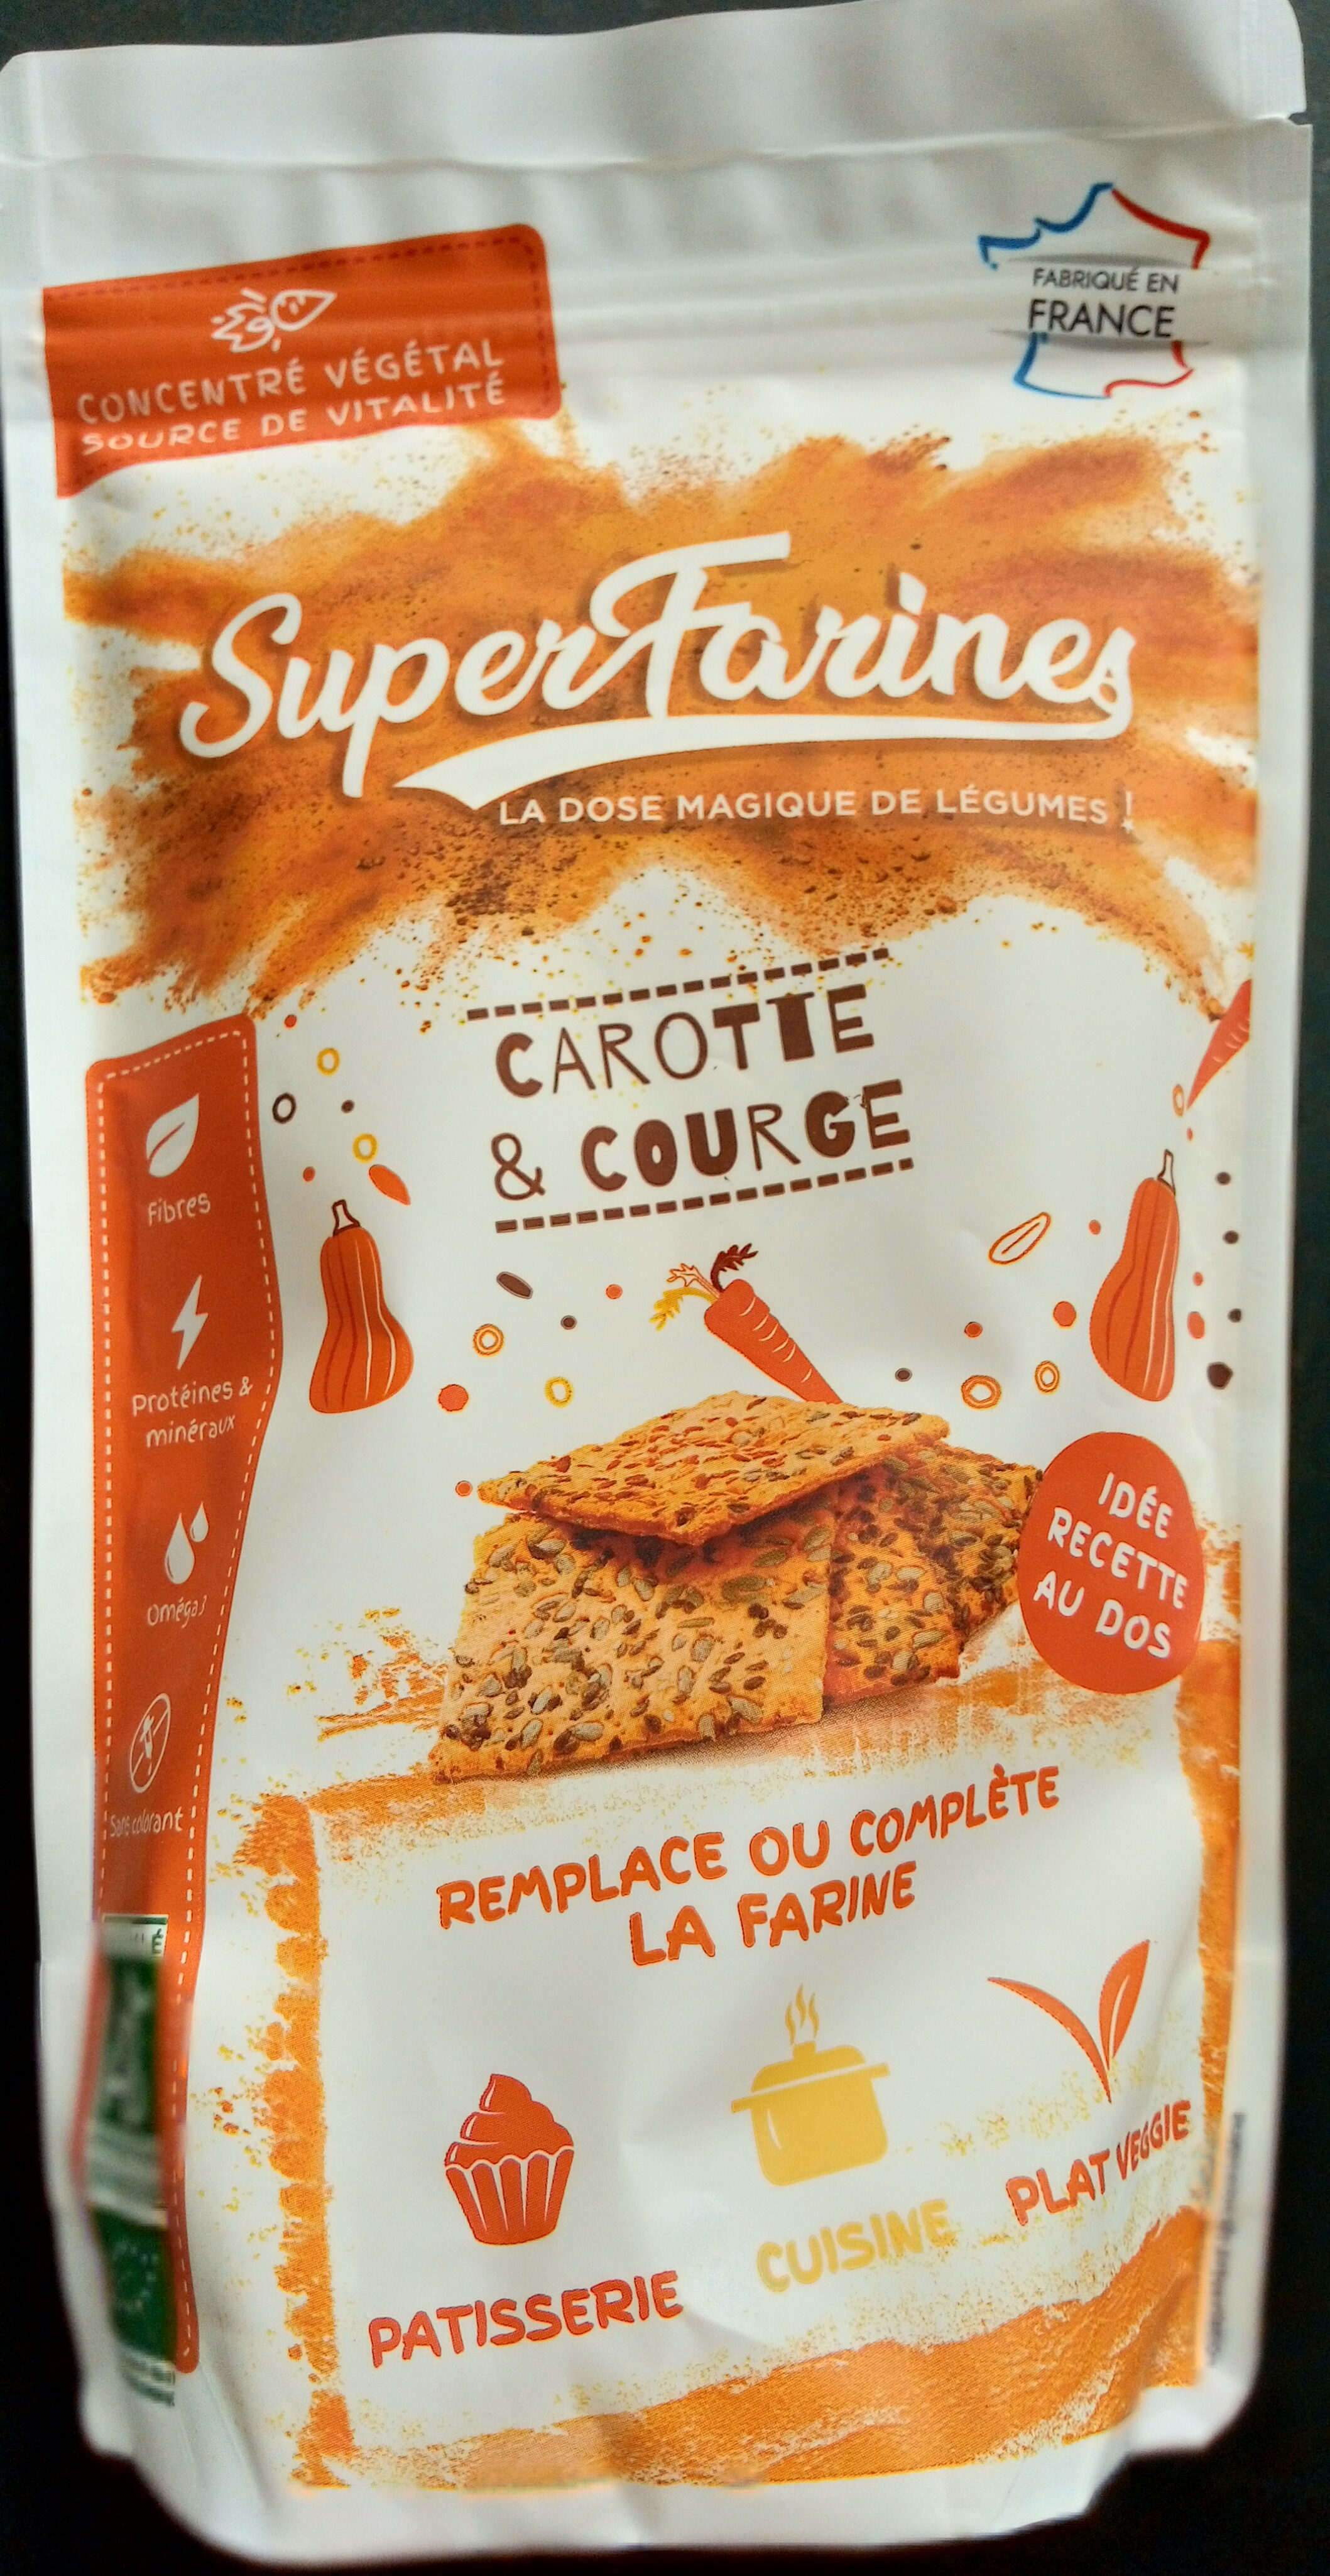 Superfarines - Carotte & Courge - Product - fr